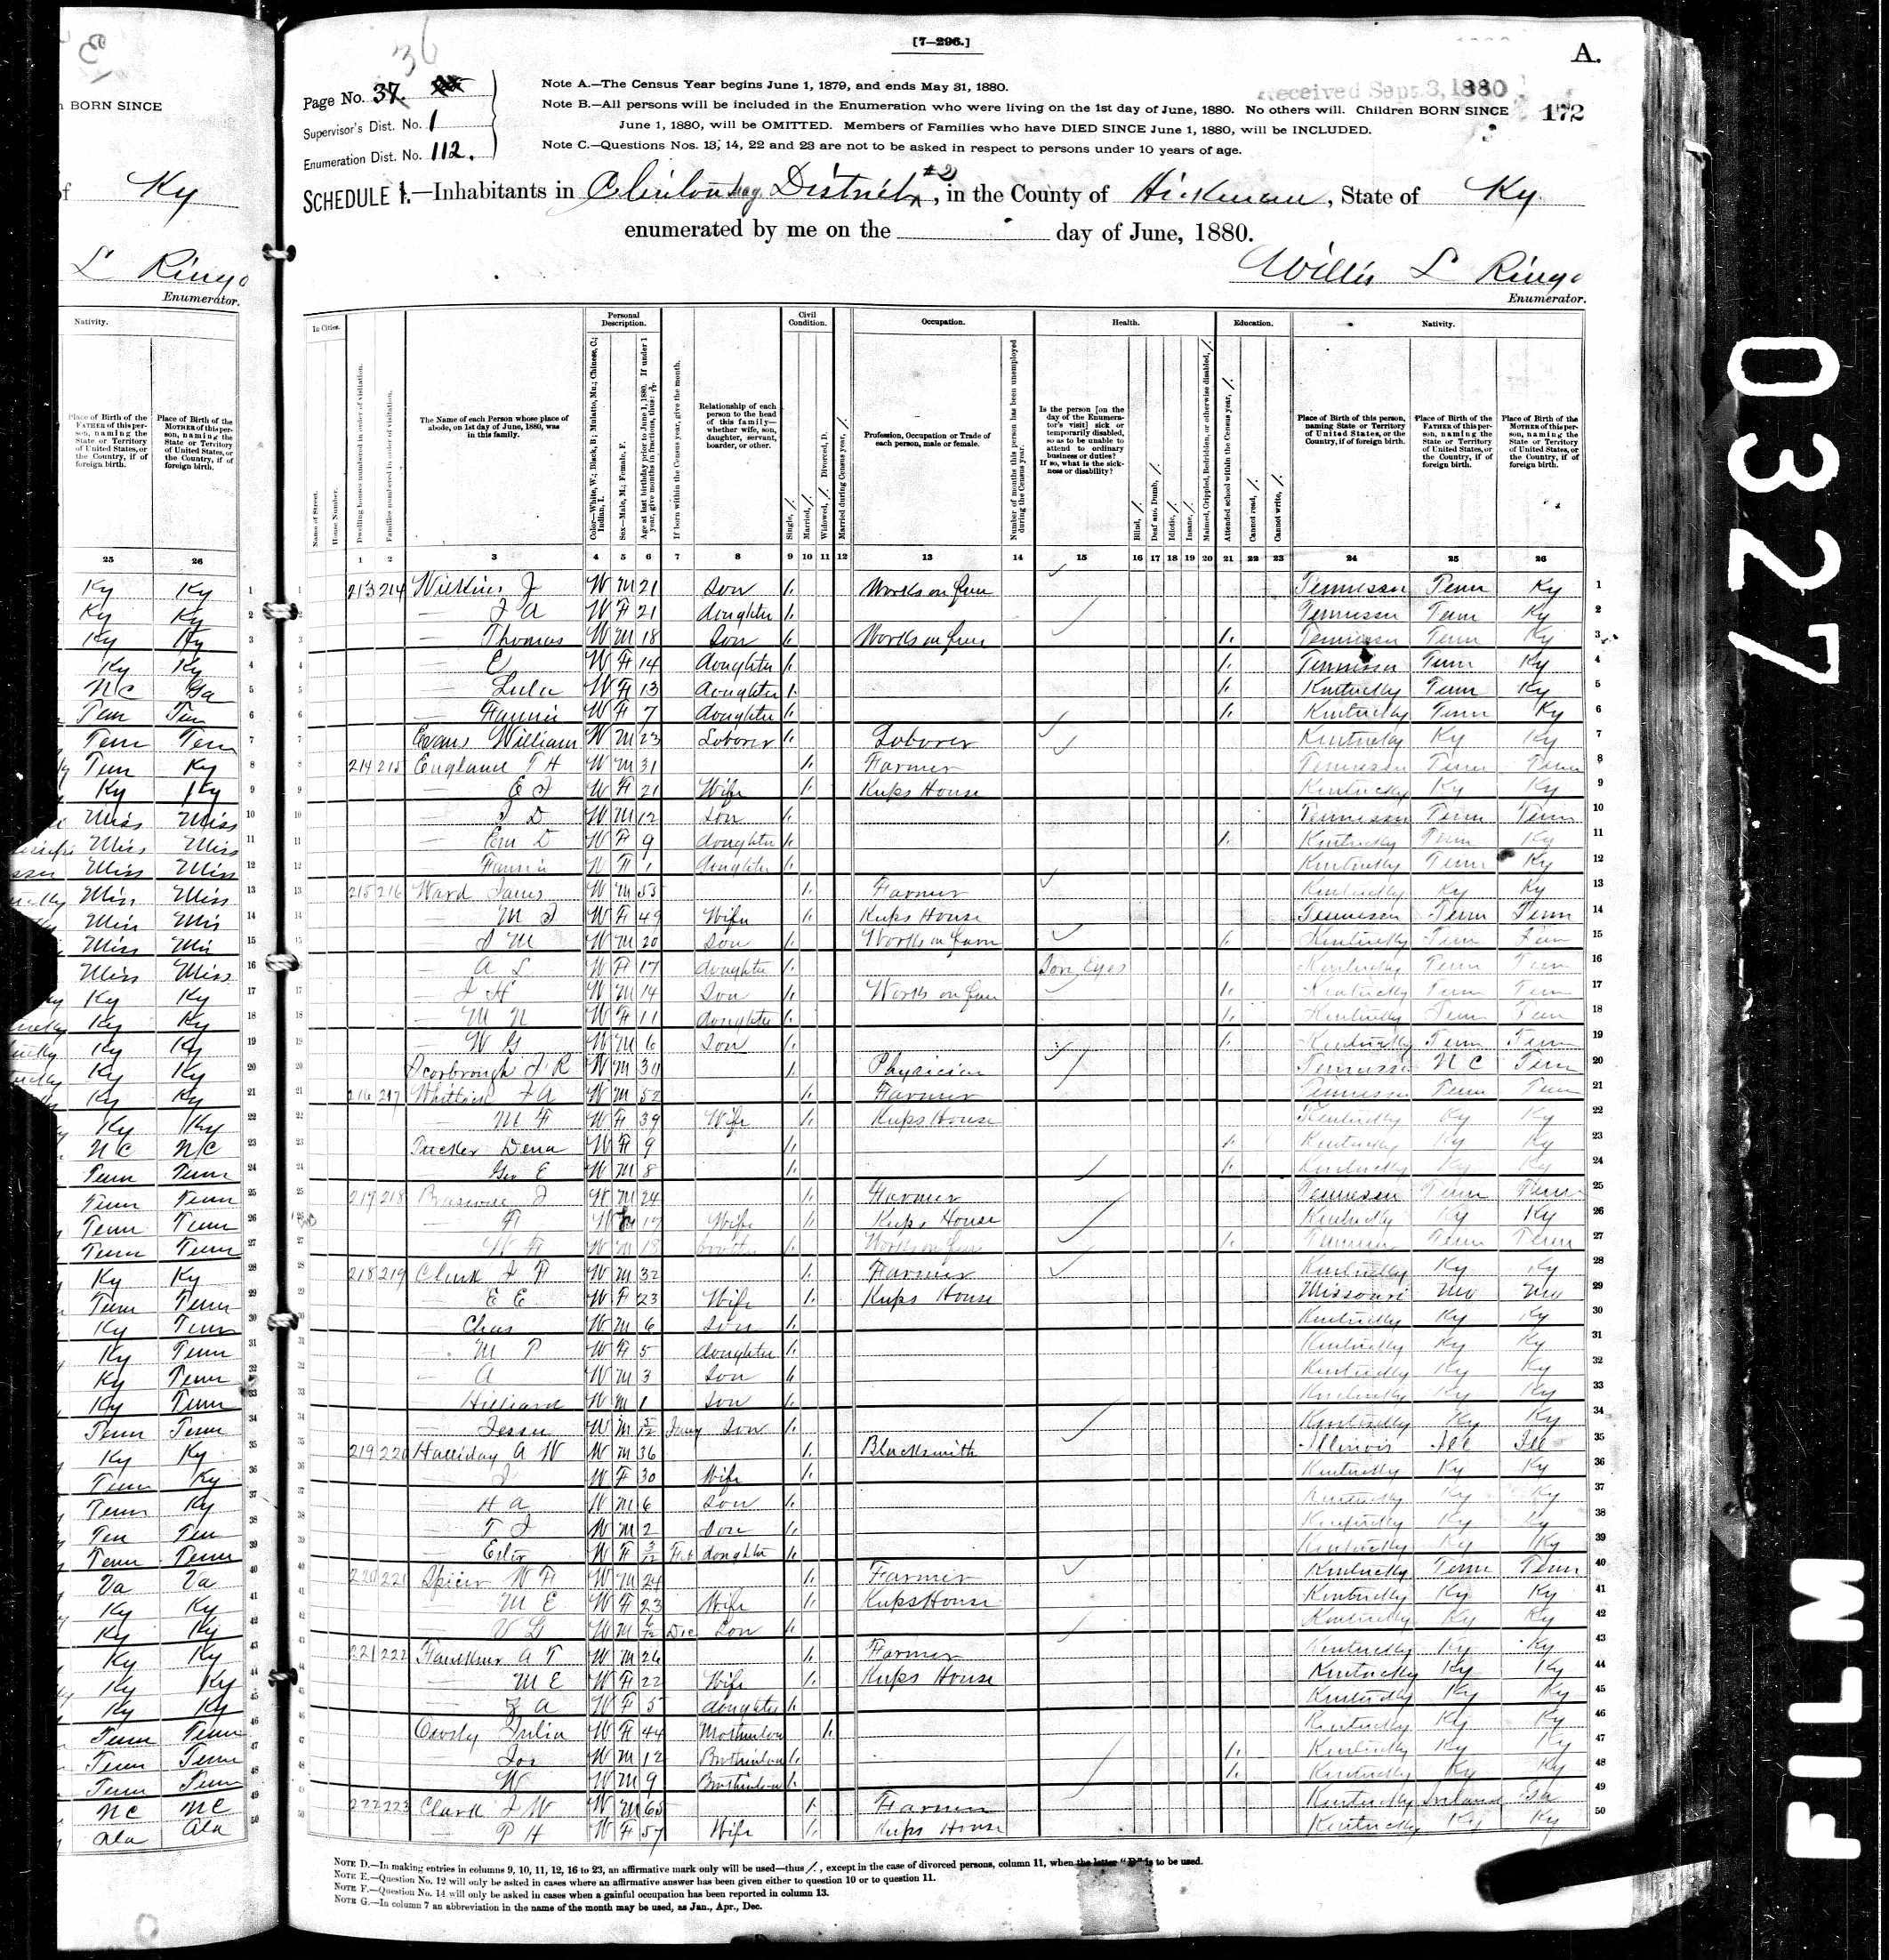 1880 Hickman County, Kentucky, census of 'J.' and 'W. F. Braswell,' identified sons of Wilson and Martha (Evans) Brazzell of Dickson County, Tennessee.